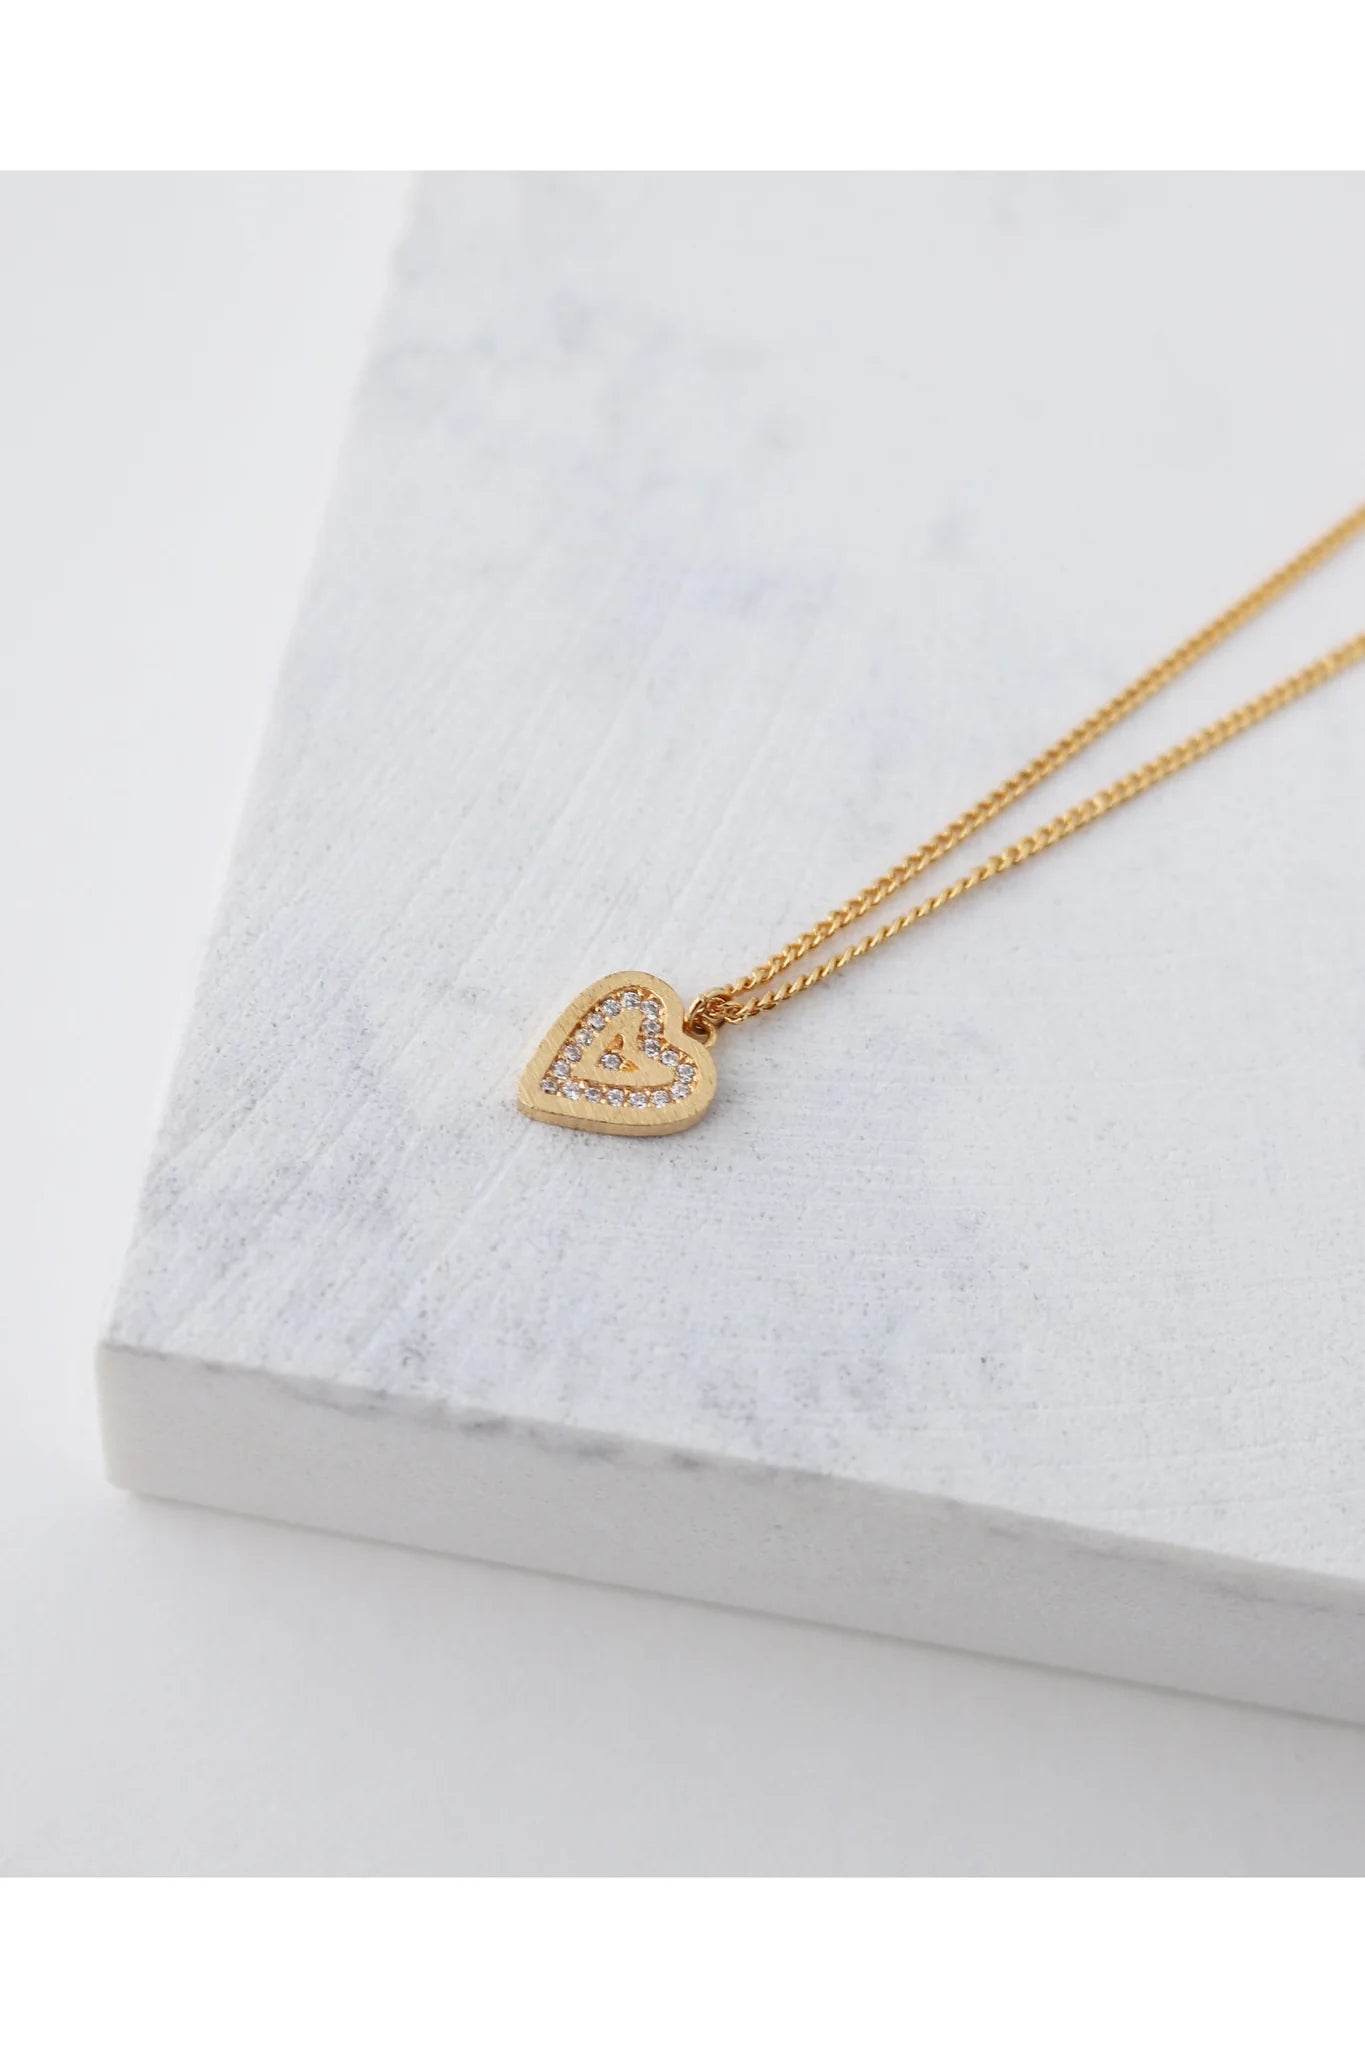 From the Heart Pave Heart Necklace Gold